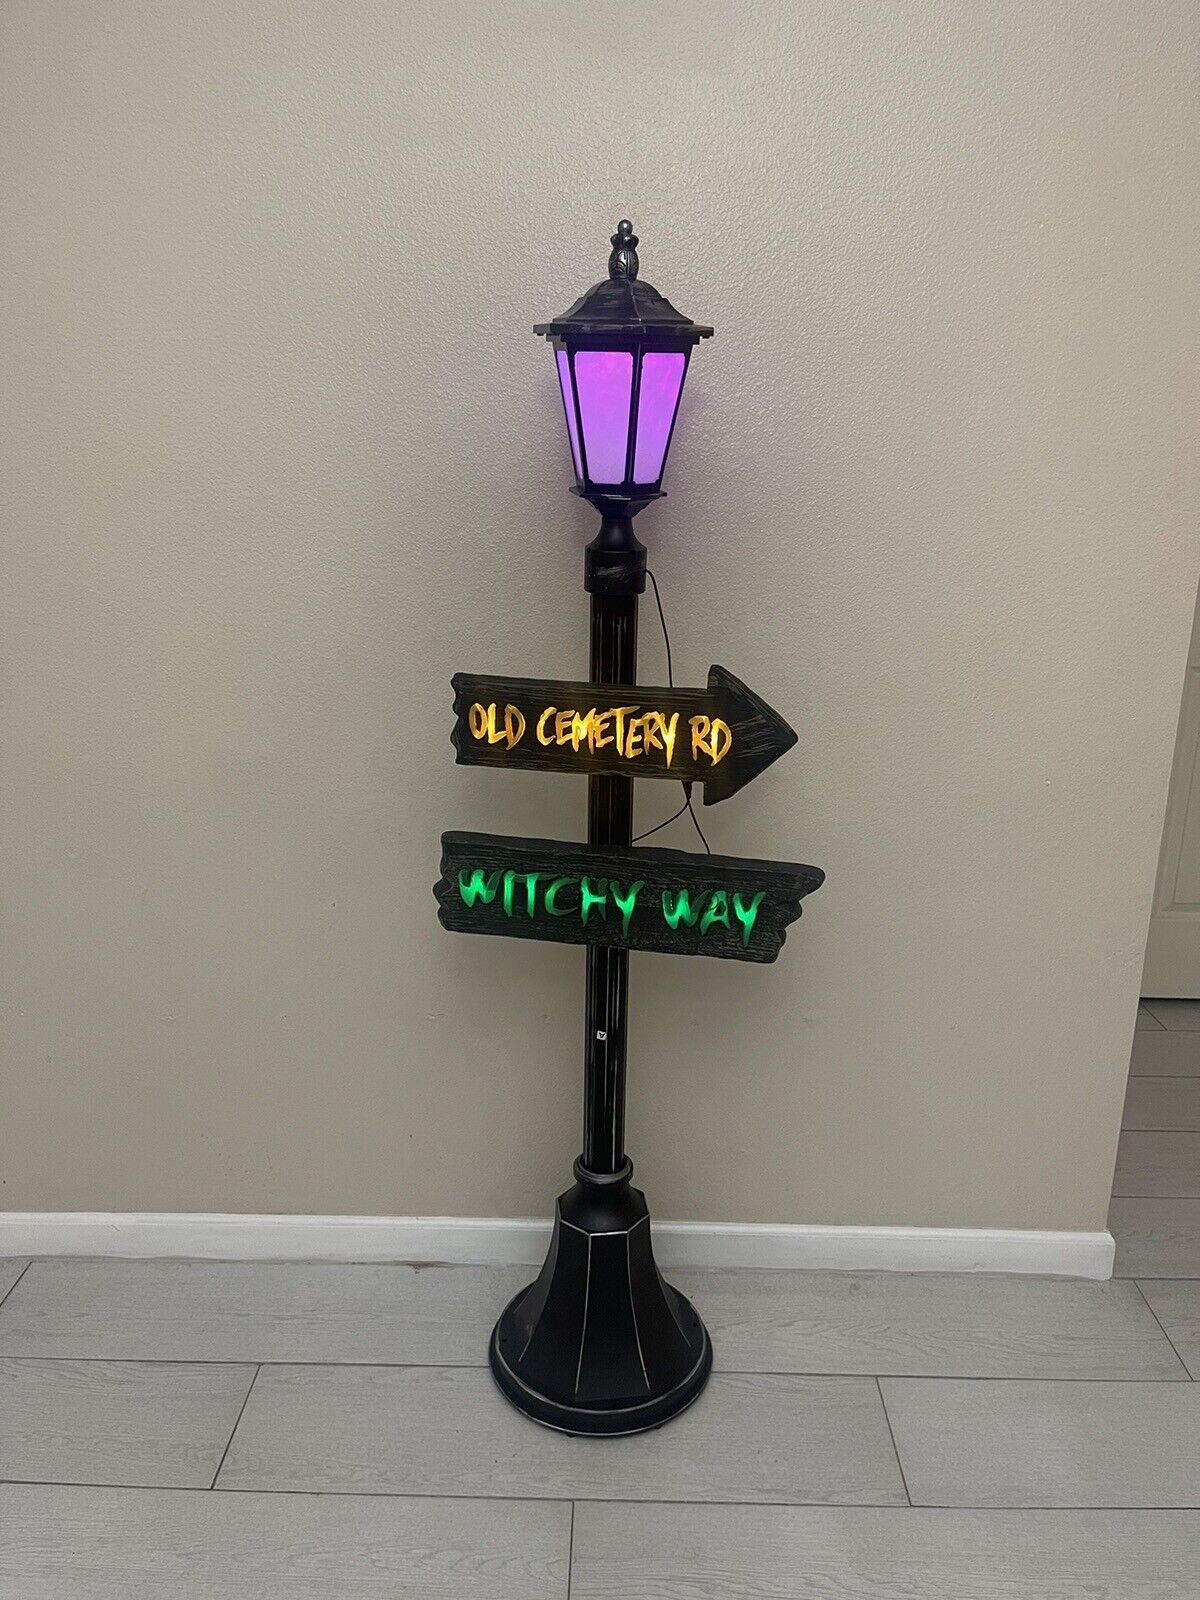 Halloween Multi Color Changing Light Lamp Post w/ Witch Way Directional Signs 5’